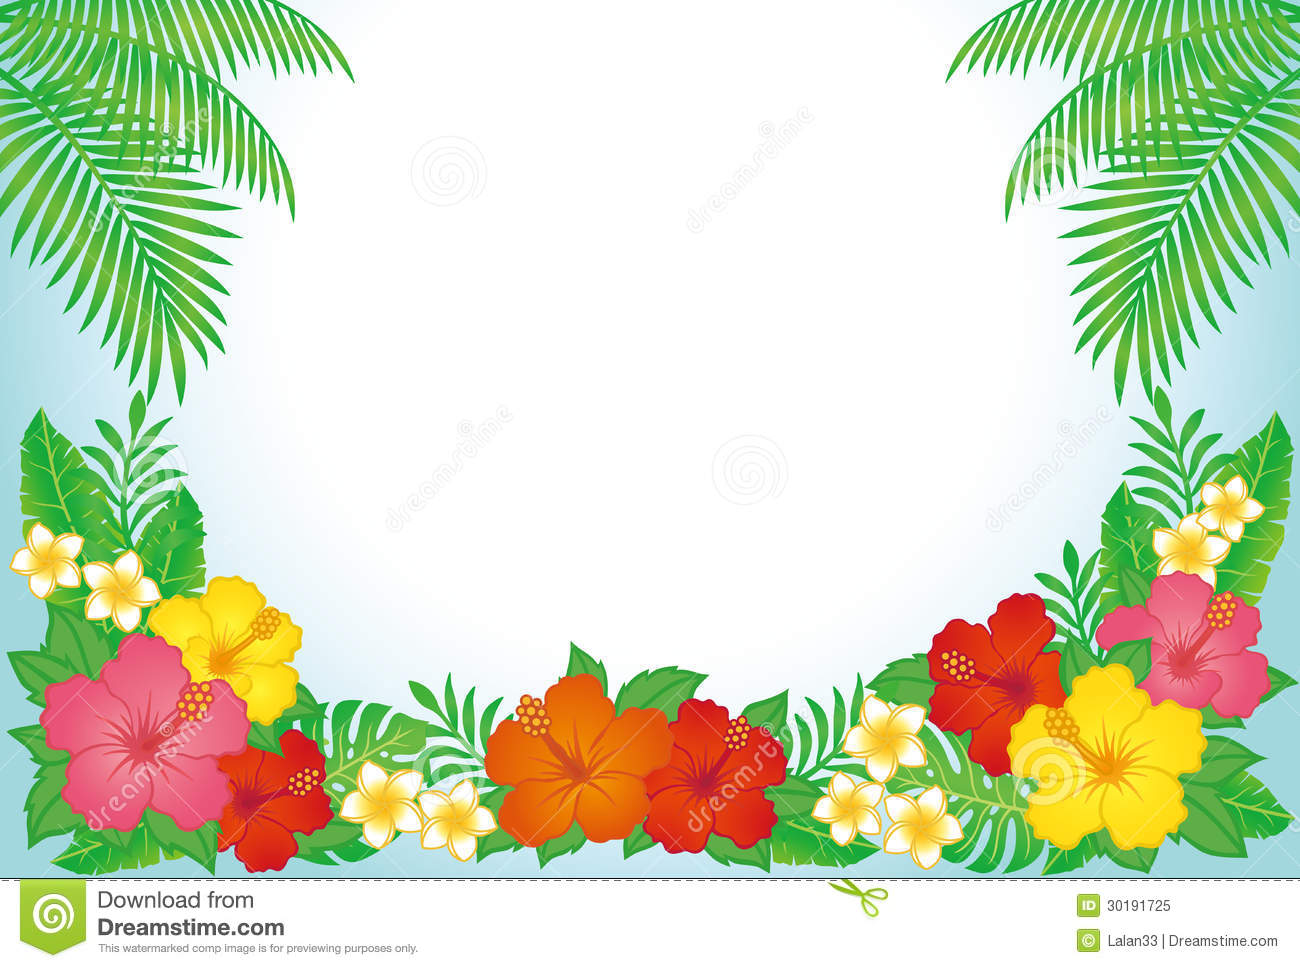 hawaii clipart background - photo #17